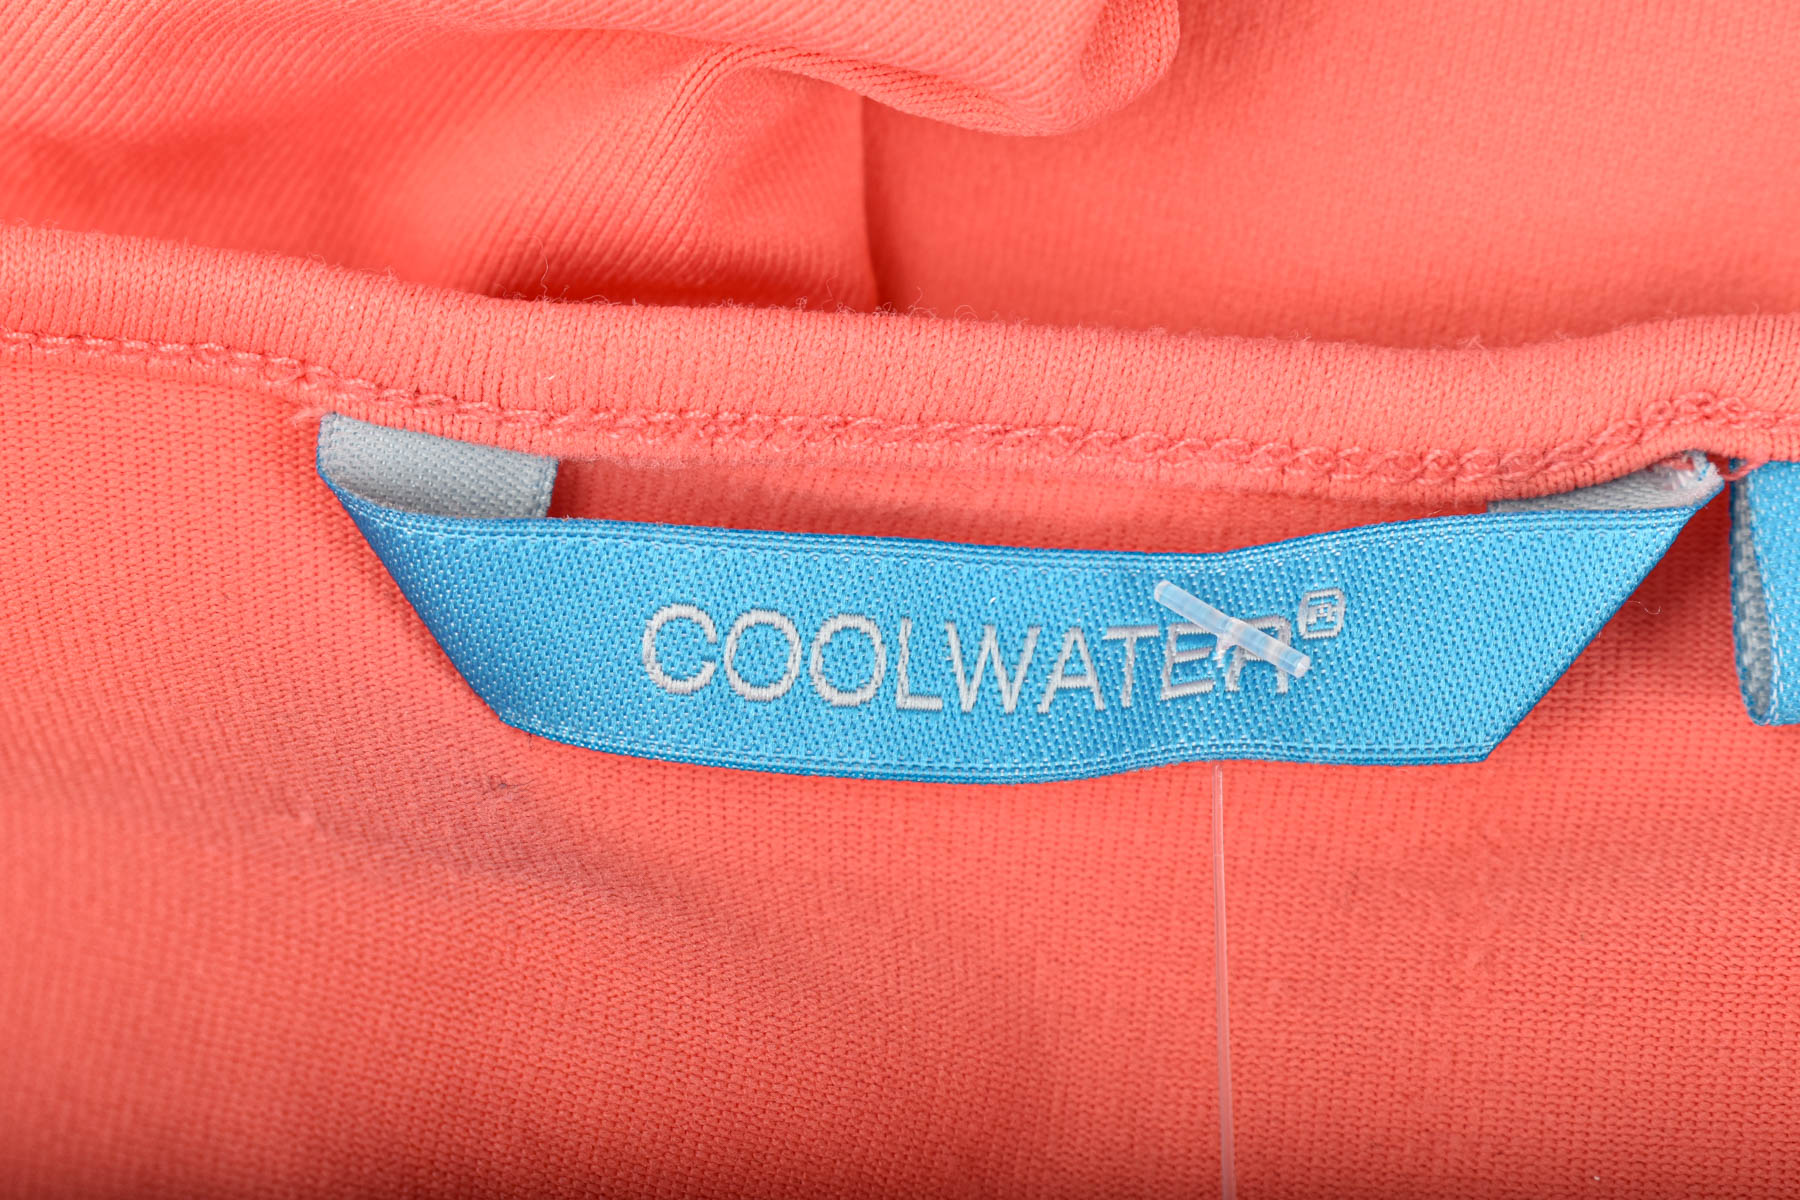 Women's t-shirt - Coolwater - 2